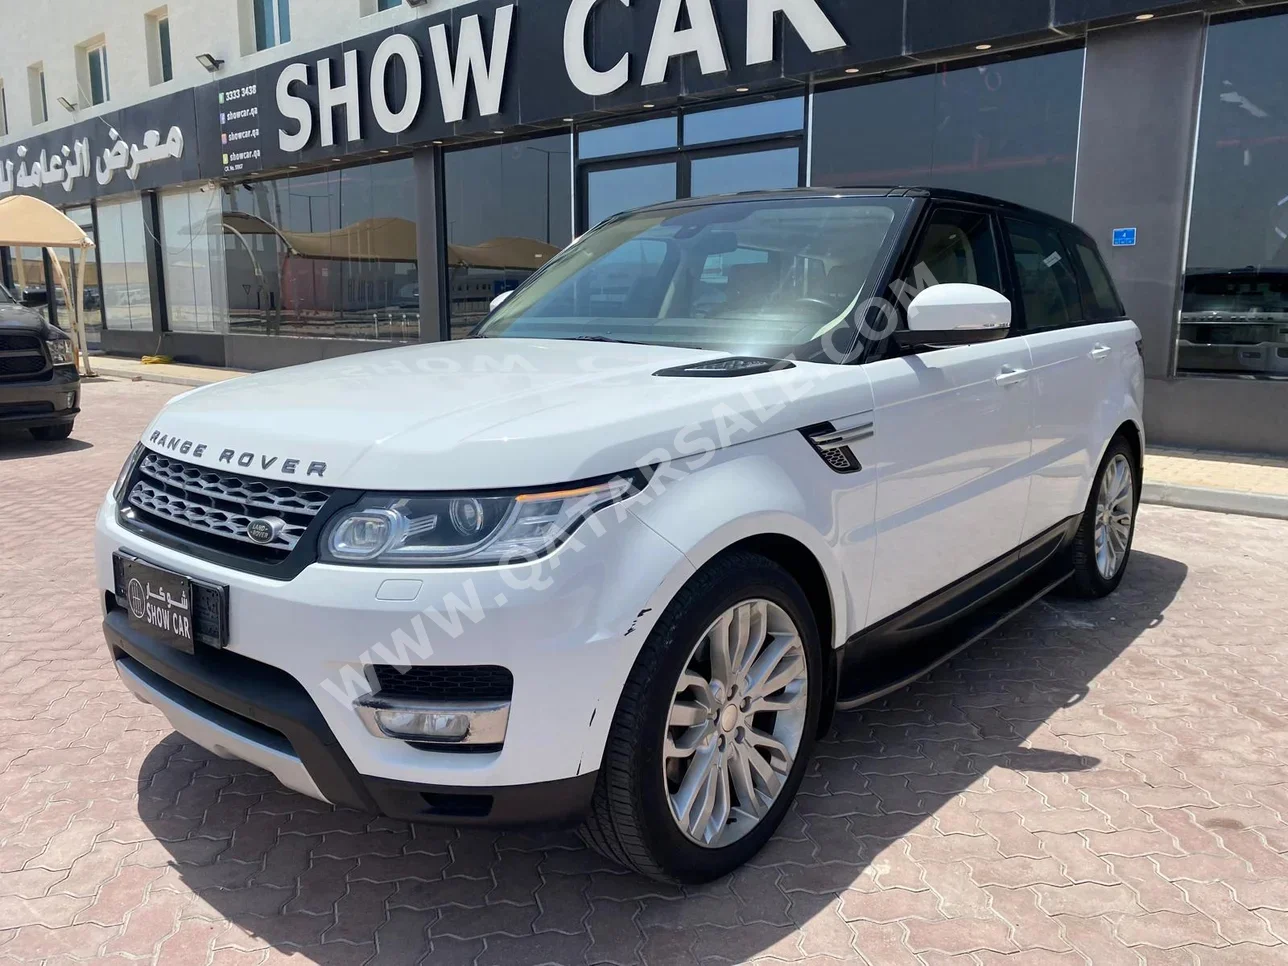 Land Rover  Range Rover  Sport HSE  2015  Automatic  89,000 Km  6 Cylinder  Four Wheel Drive (4WD)  SUV  White